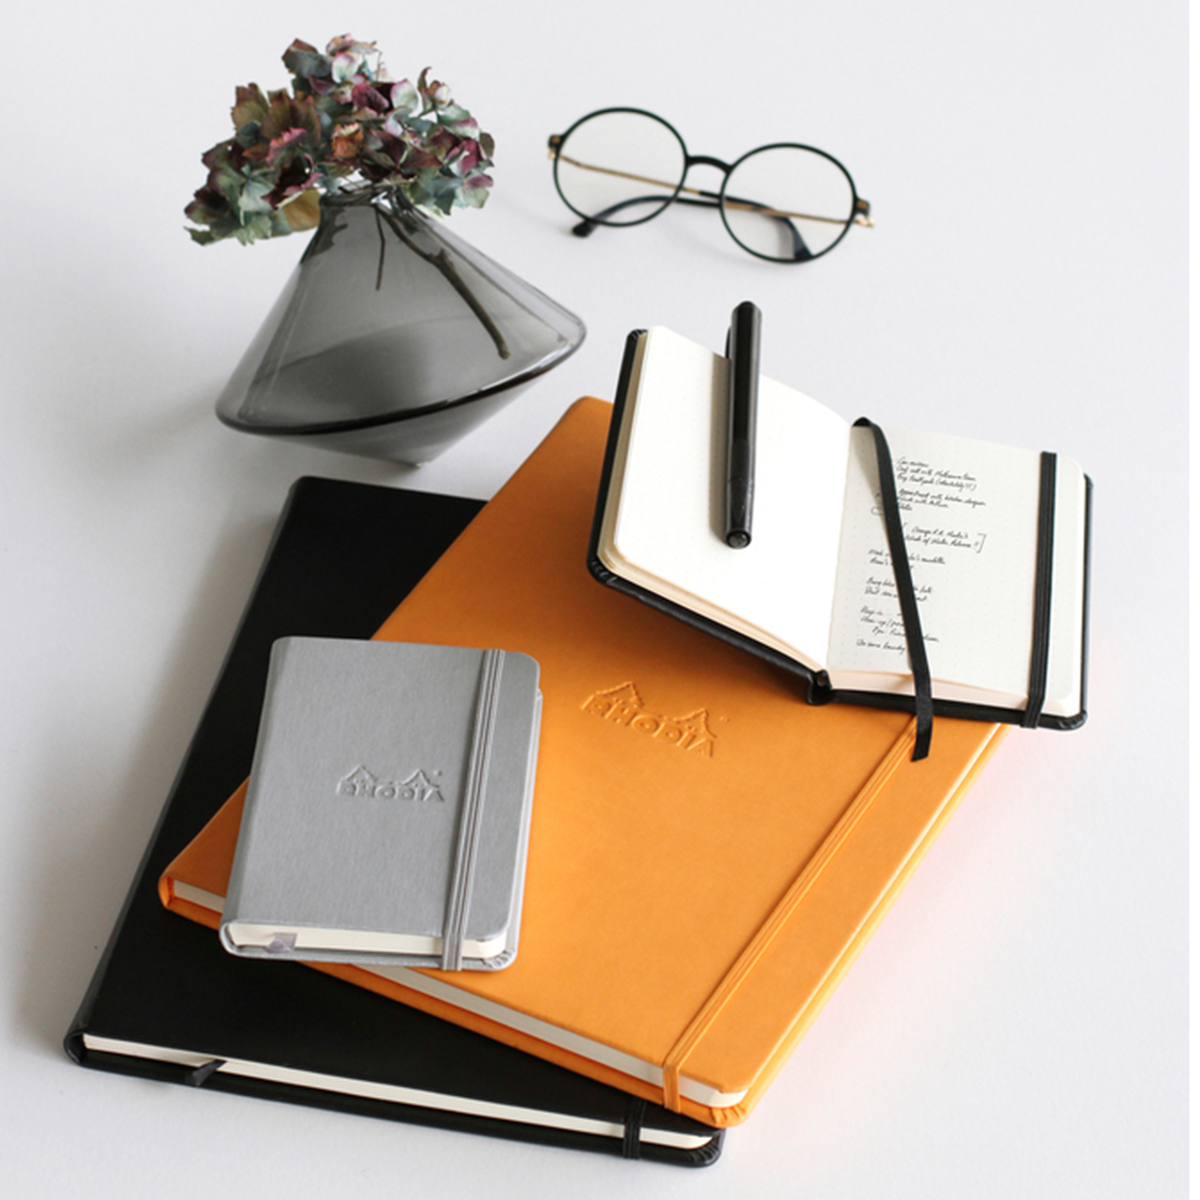 Webnotebook A6 Ruled in the group Paper & Pads / Note & Memo / Notebooks & Journals at Pen Store (110222)